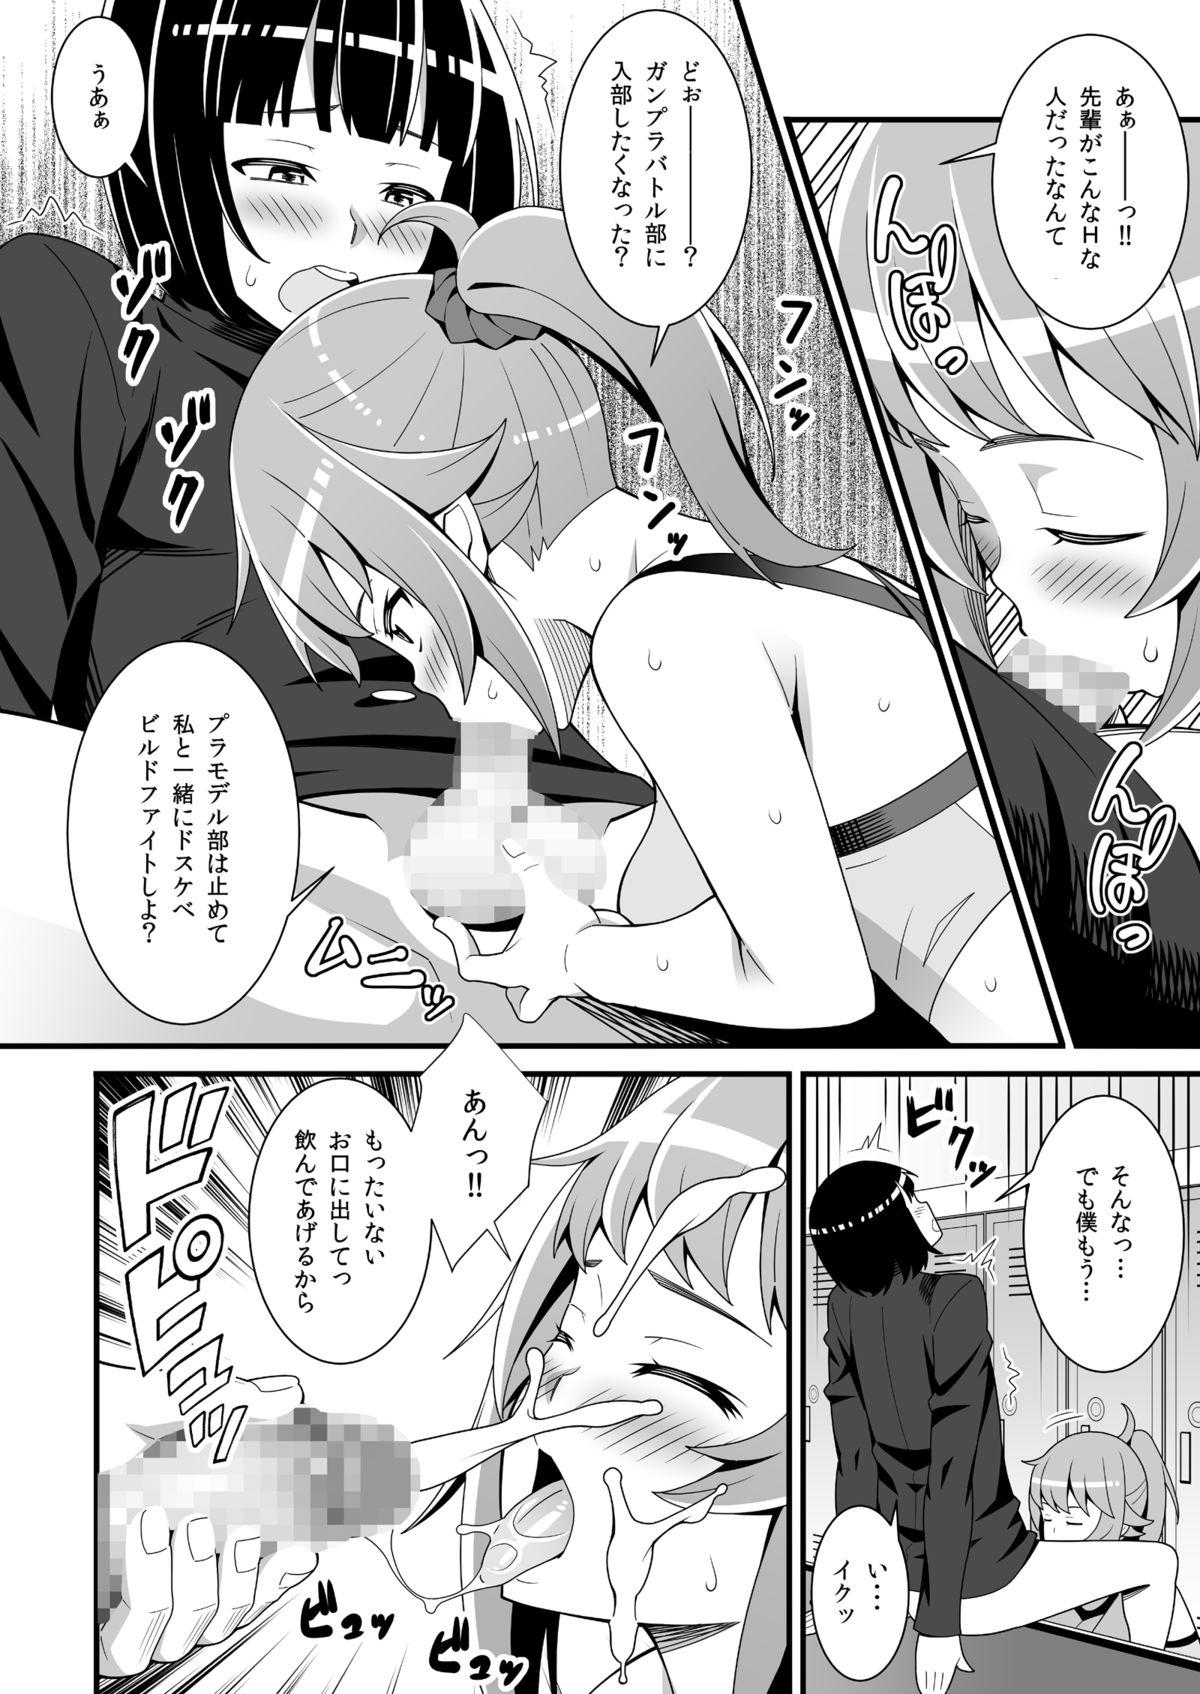 Naked Buchou no Dosukebe Buin Kanyuu Try - Gundam build fighters try Weird - Page 11